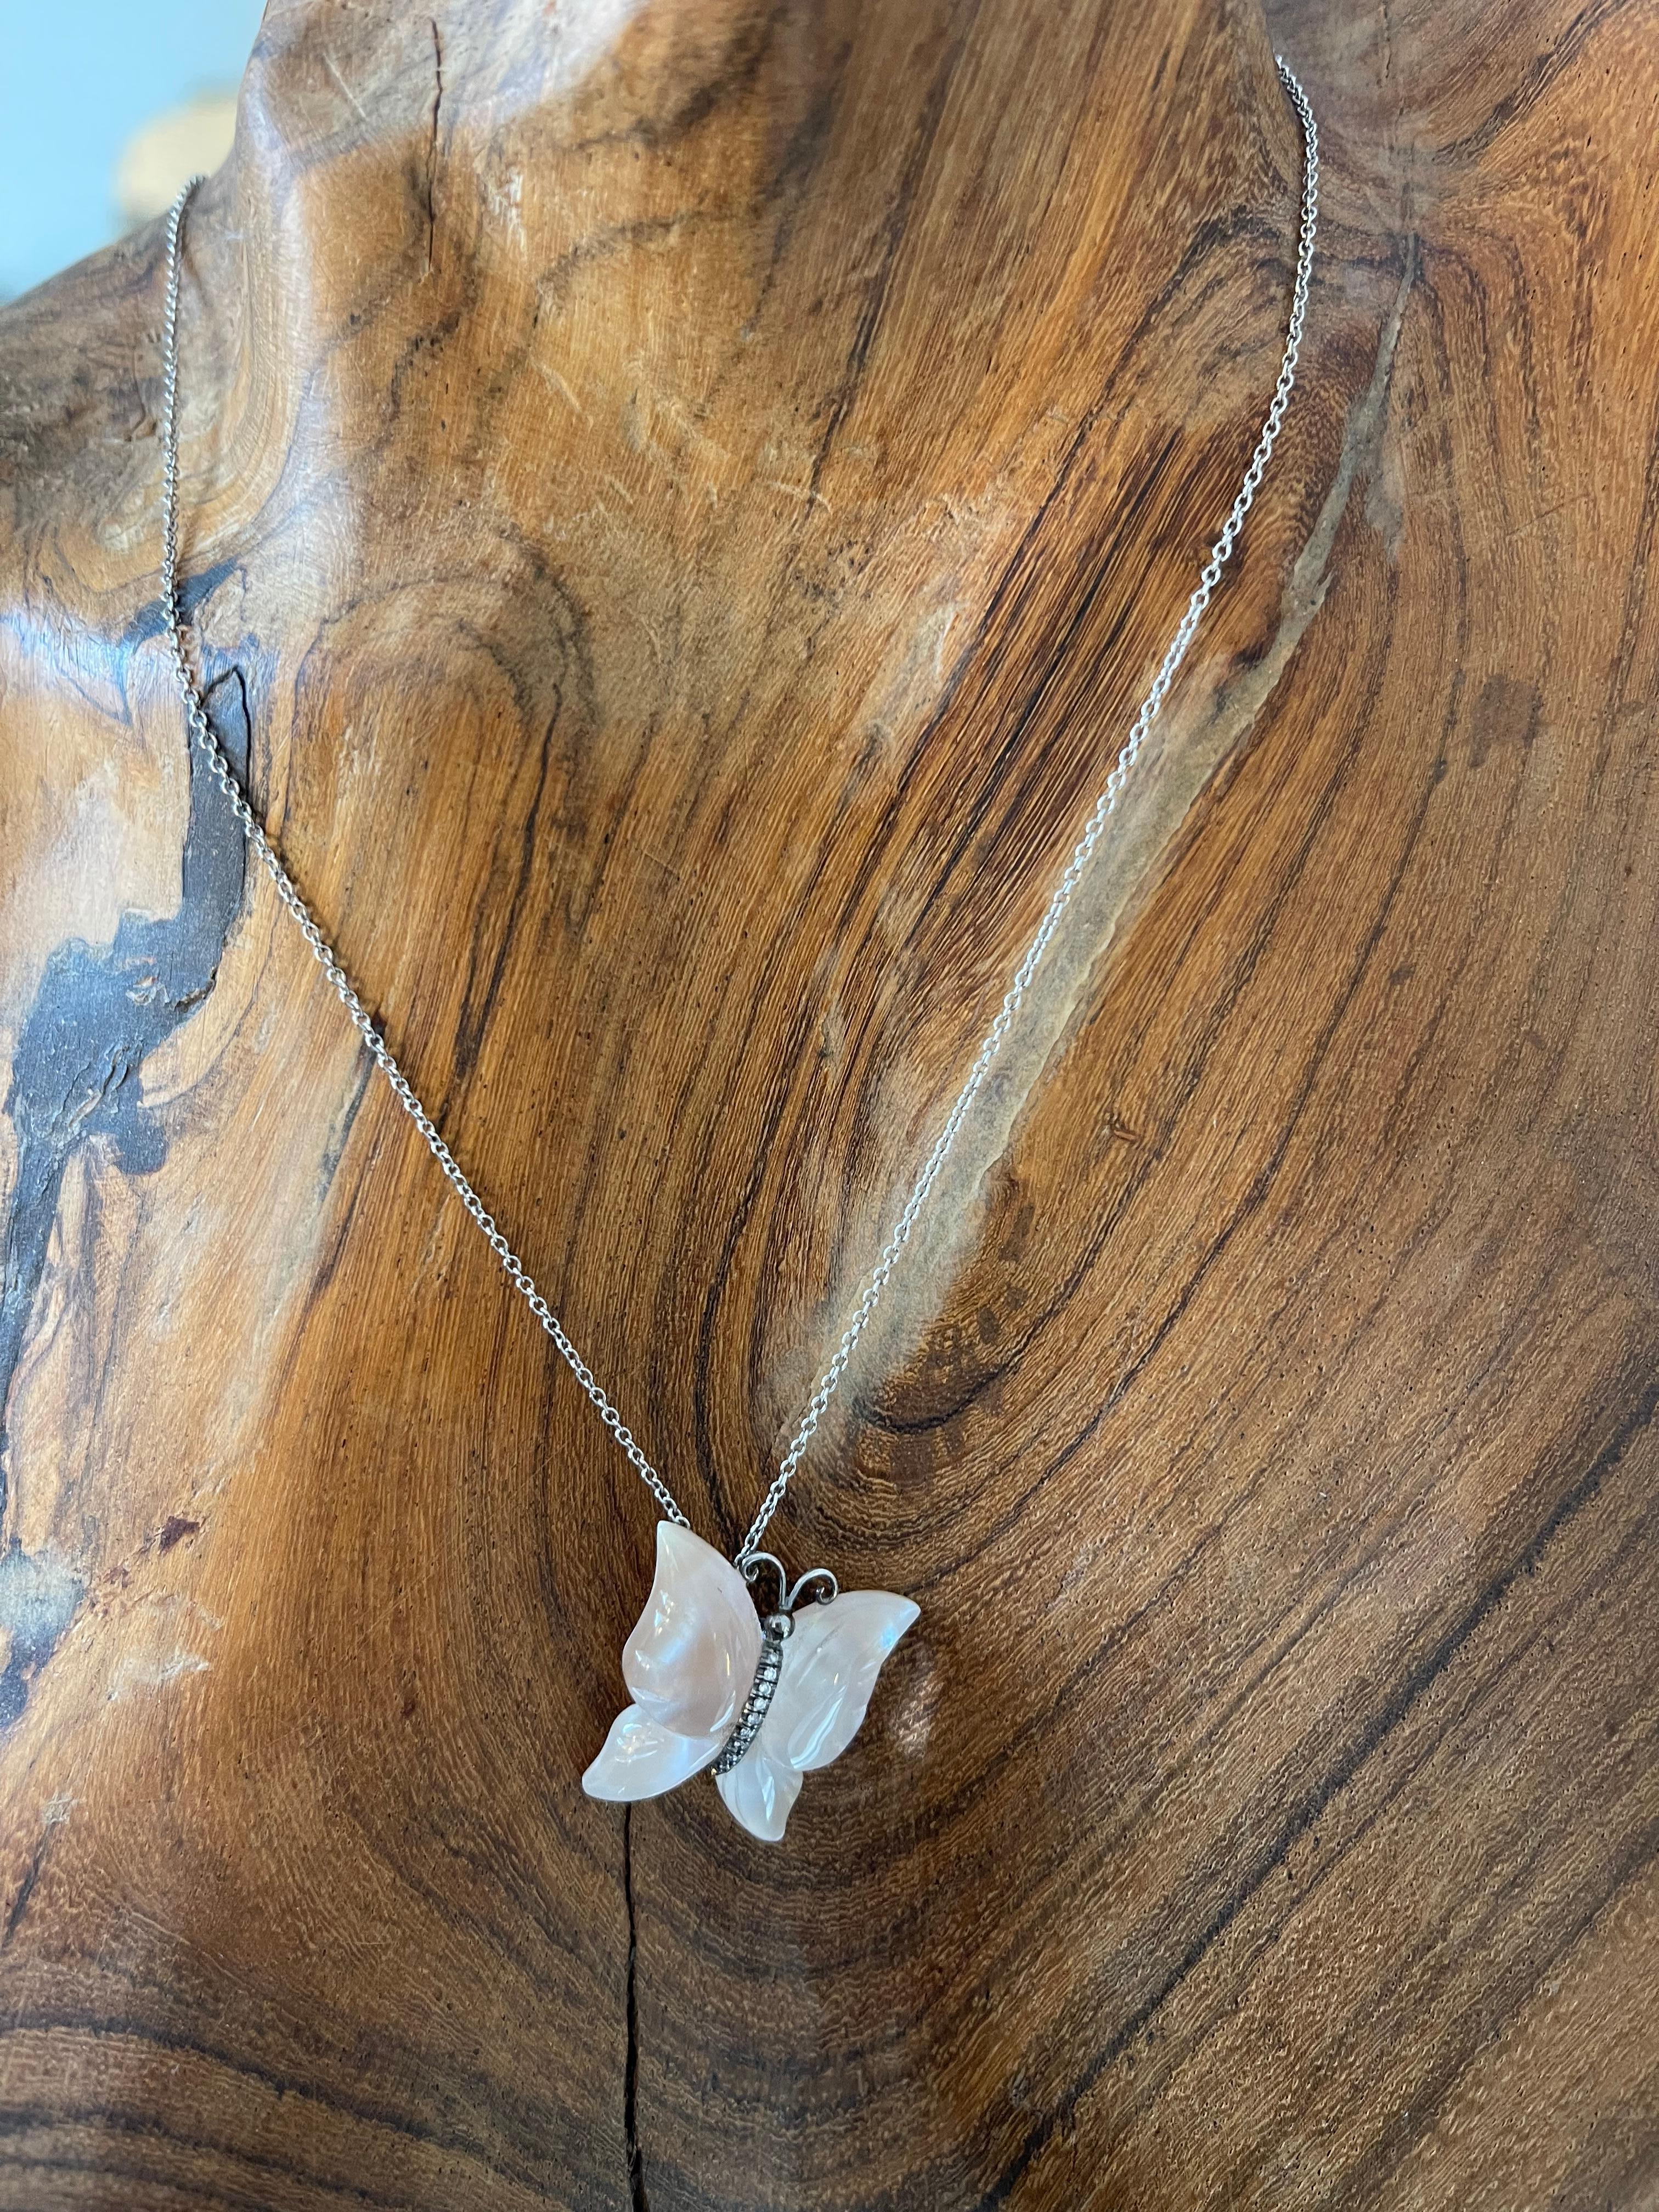 Zoe X blueviewATELIER diamond rose quartz mother of pearl backed butterfly platinum necklace 18 inches with adjustable loop at 16 inches 

Zoe was sold exclusively at the fine jewelry department in Barneys New York across the country from 2005 until